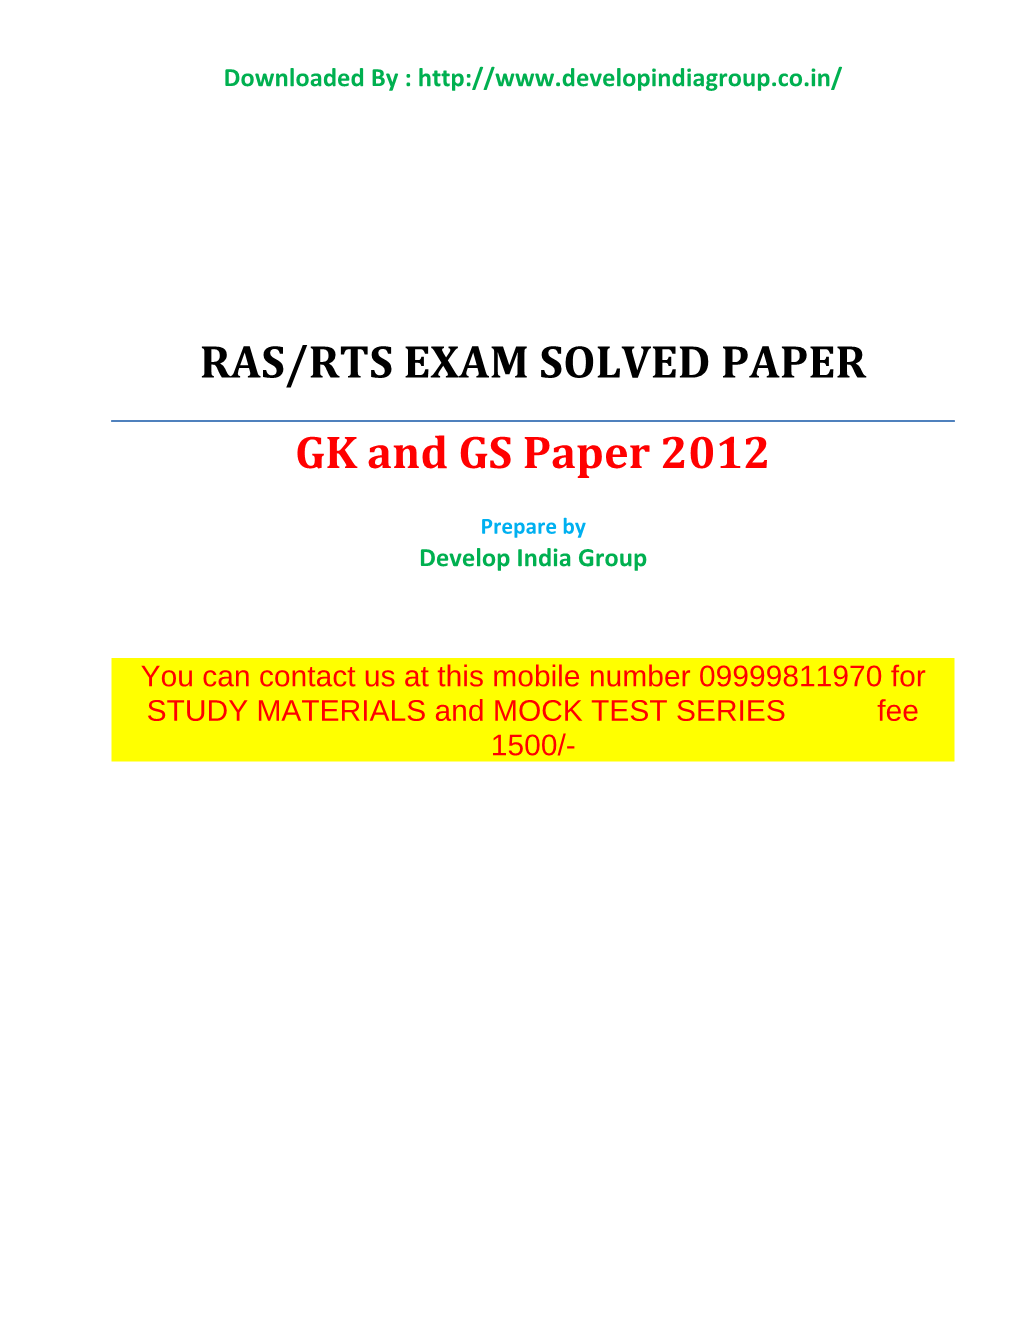 GK and GS Solved Paper 2012